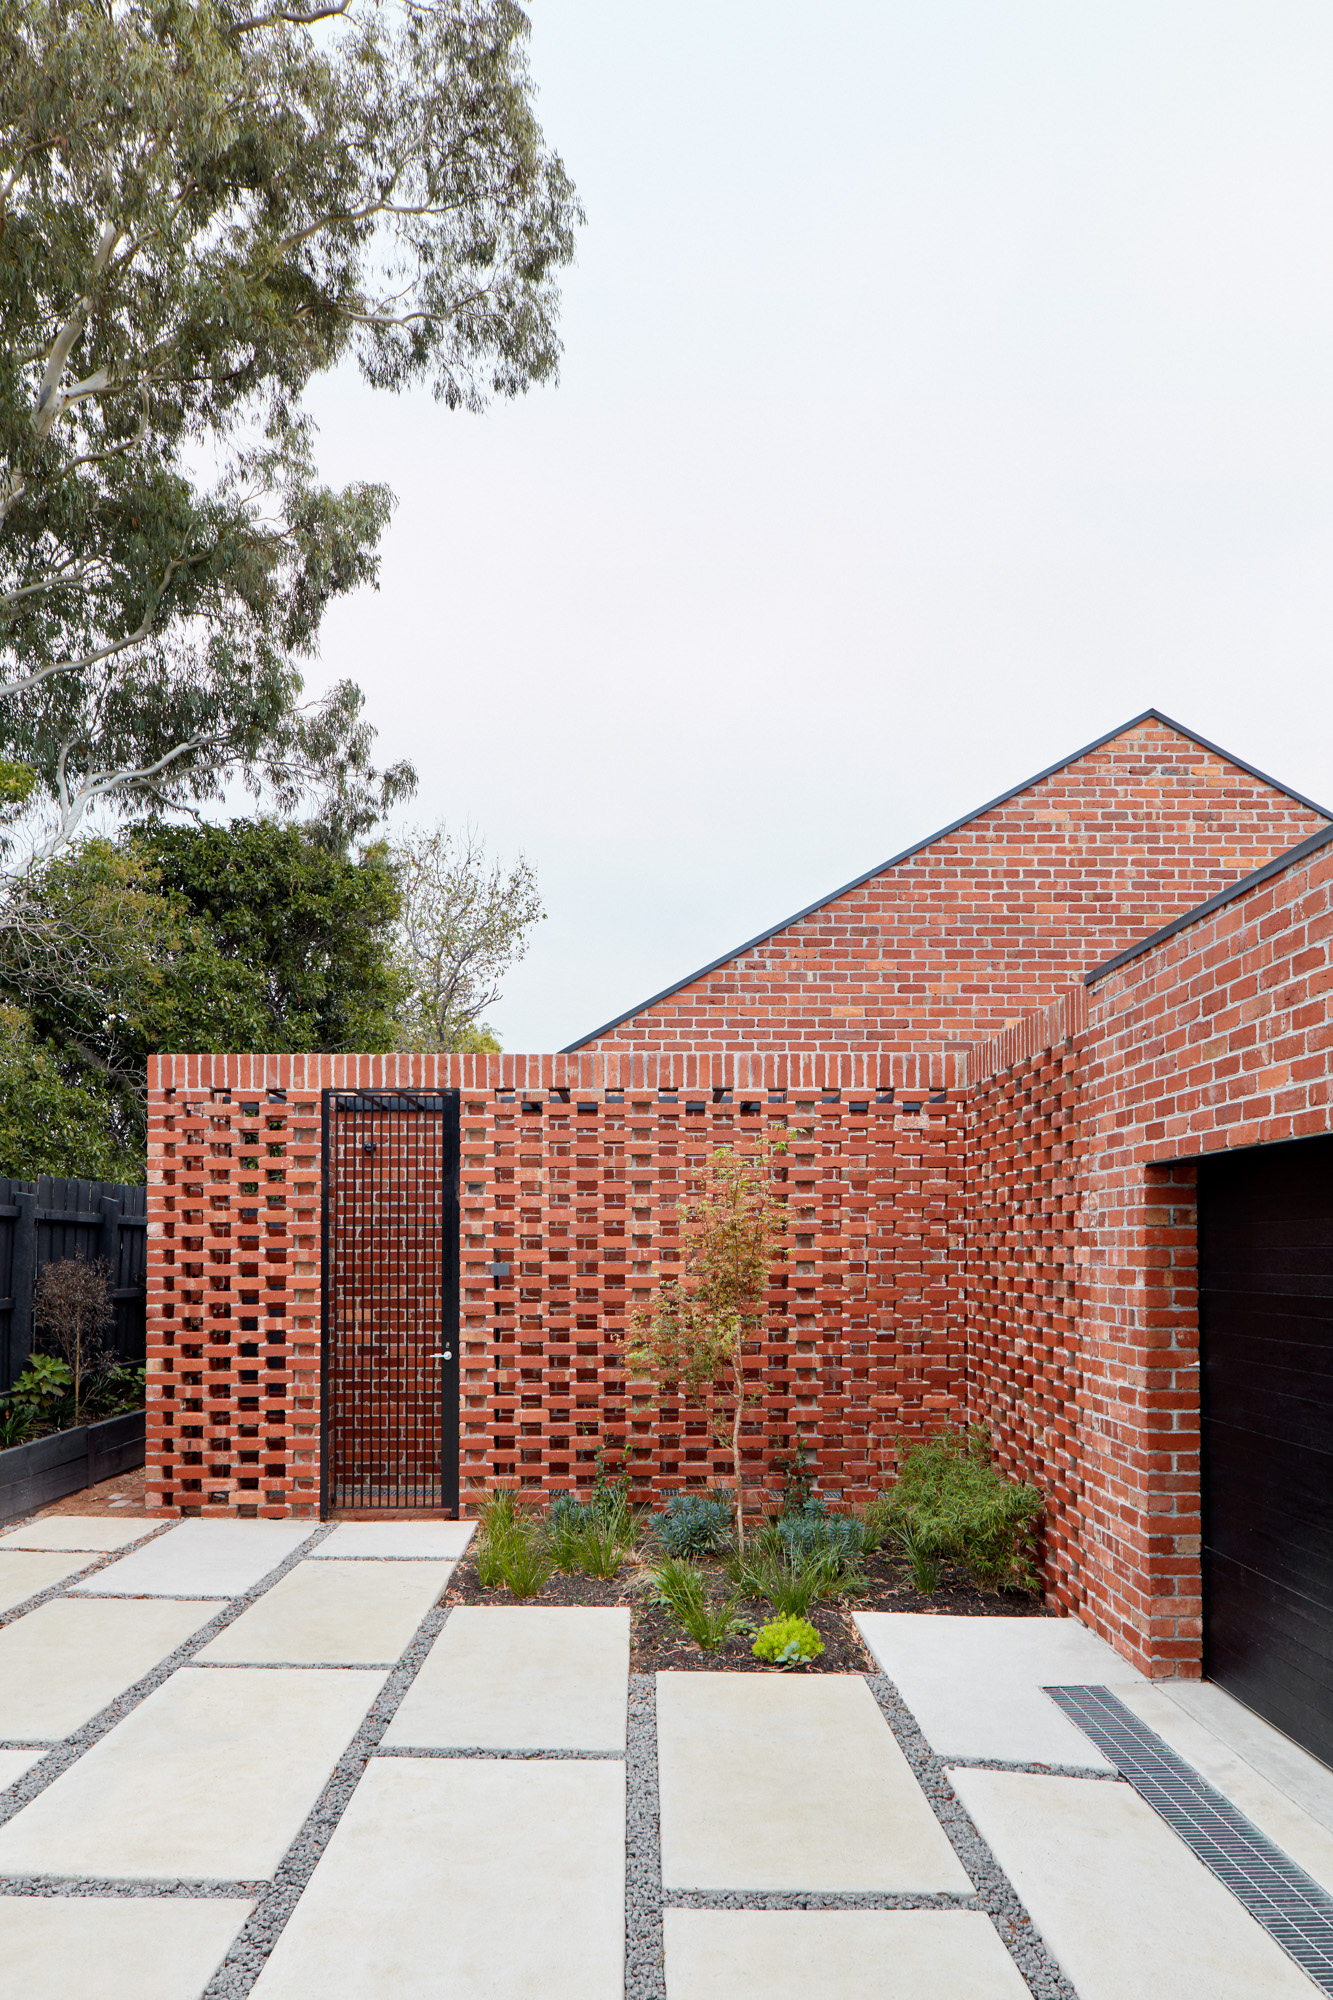 Bardolph Gardens residences with perforated brick wall facade